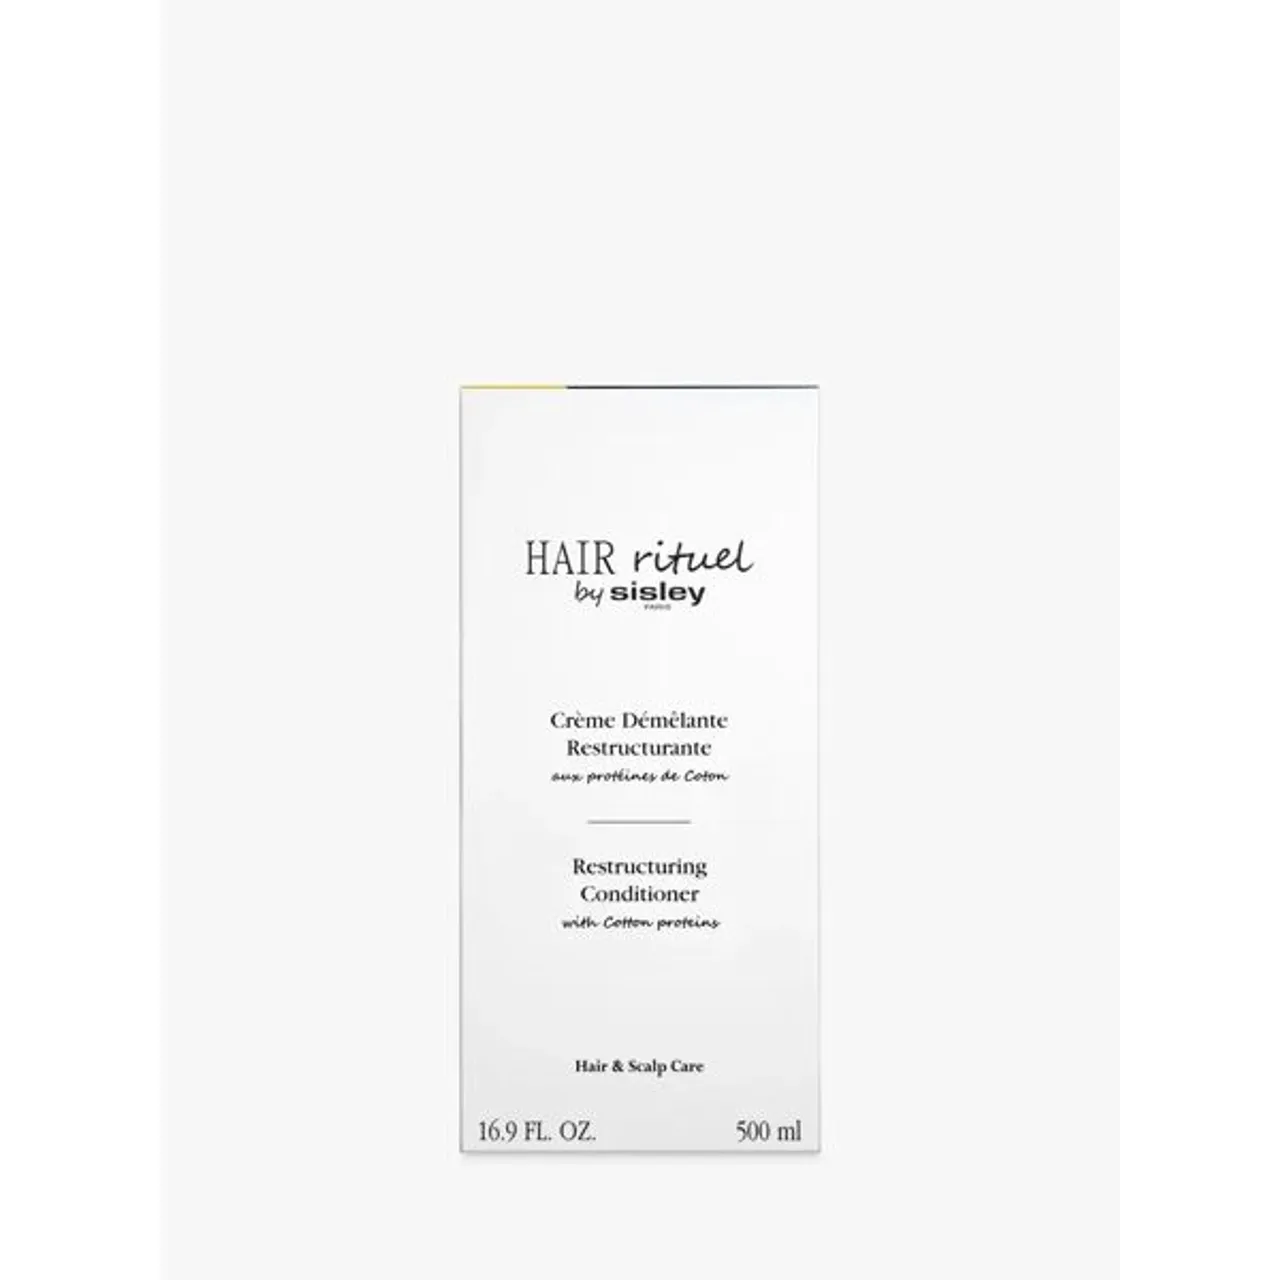 Sisley-Paris Hair Rituel Restructuring Conditioner with Cotton Proteins - Unisex - Size: 500ml